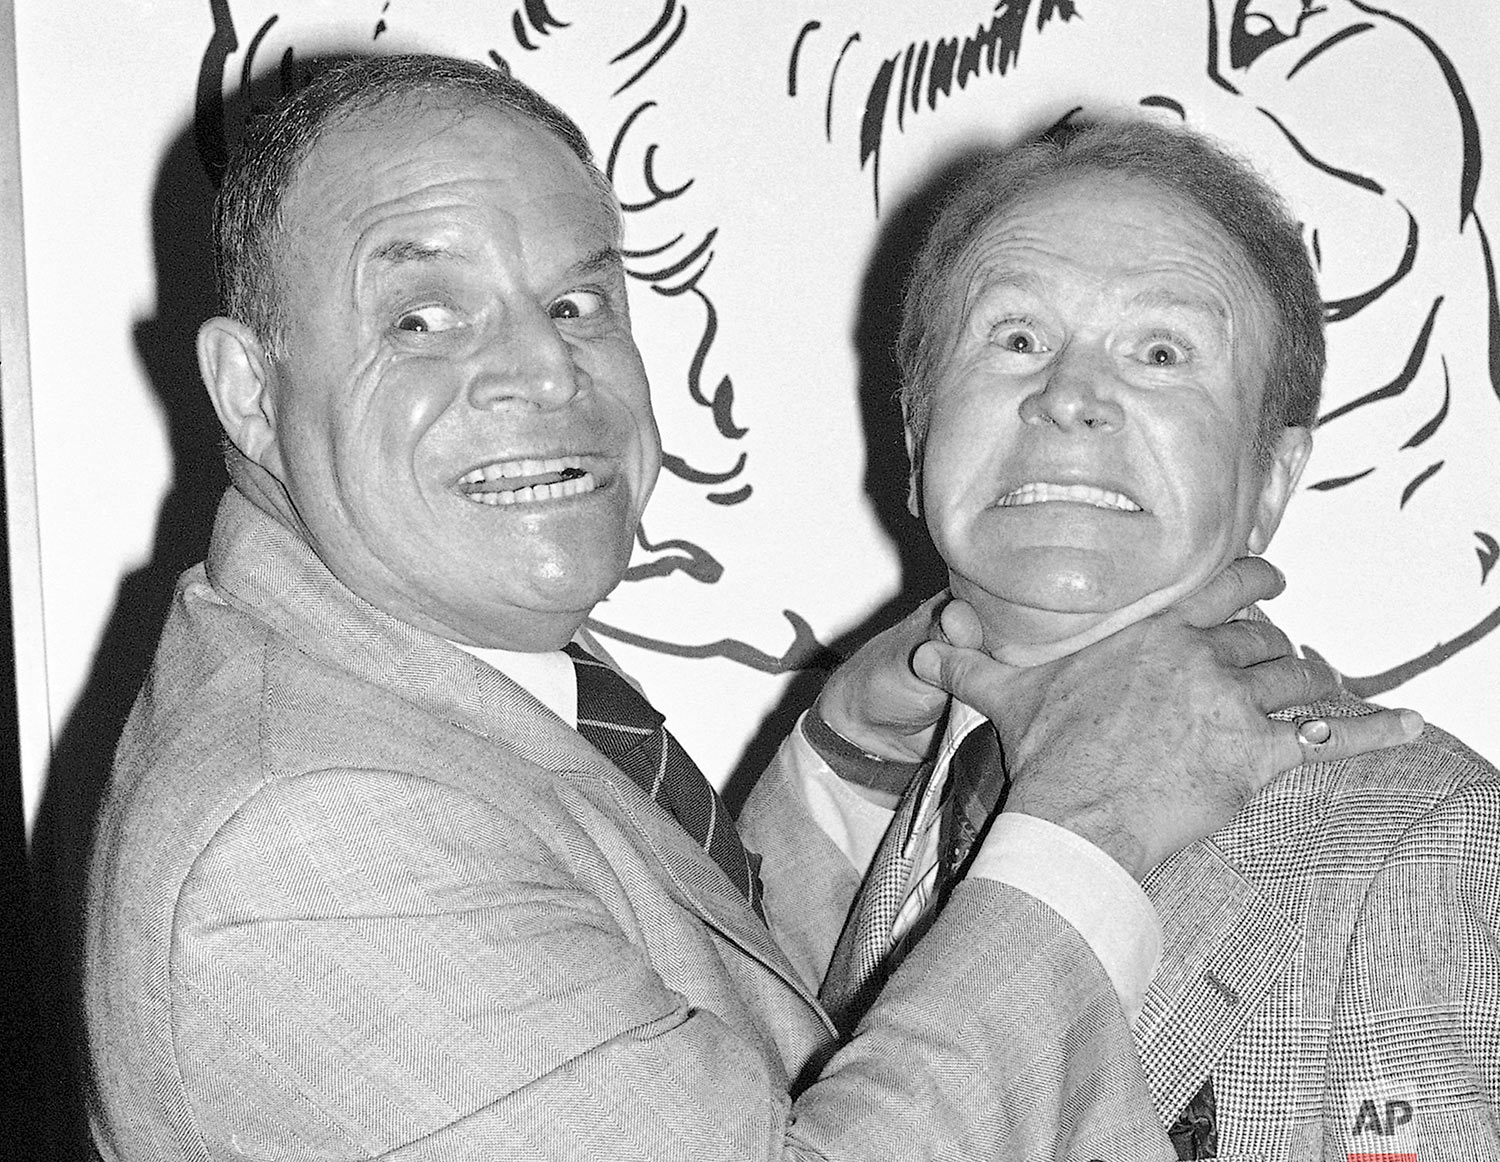  In this Nov. 10, 1977 photo, taken by Associated Press photographer Lennox McLendon shows comedians Don Rickles, left, pretending to strangle Red Buttons prior to an Annual Stag Roast in Los Angeles. AP Photo/ Lennox McLendon) 